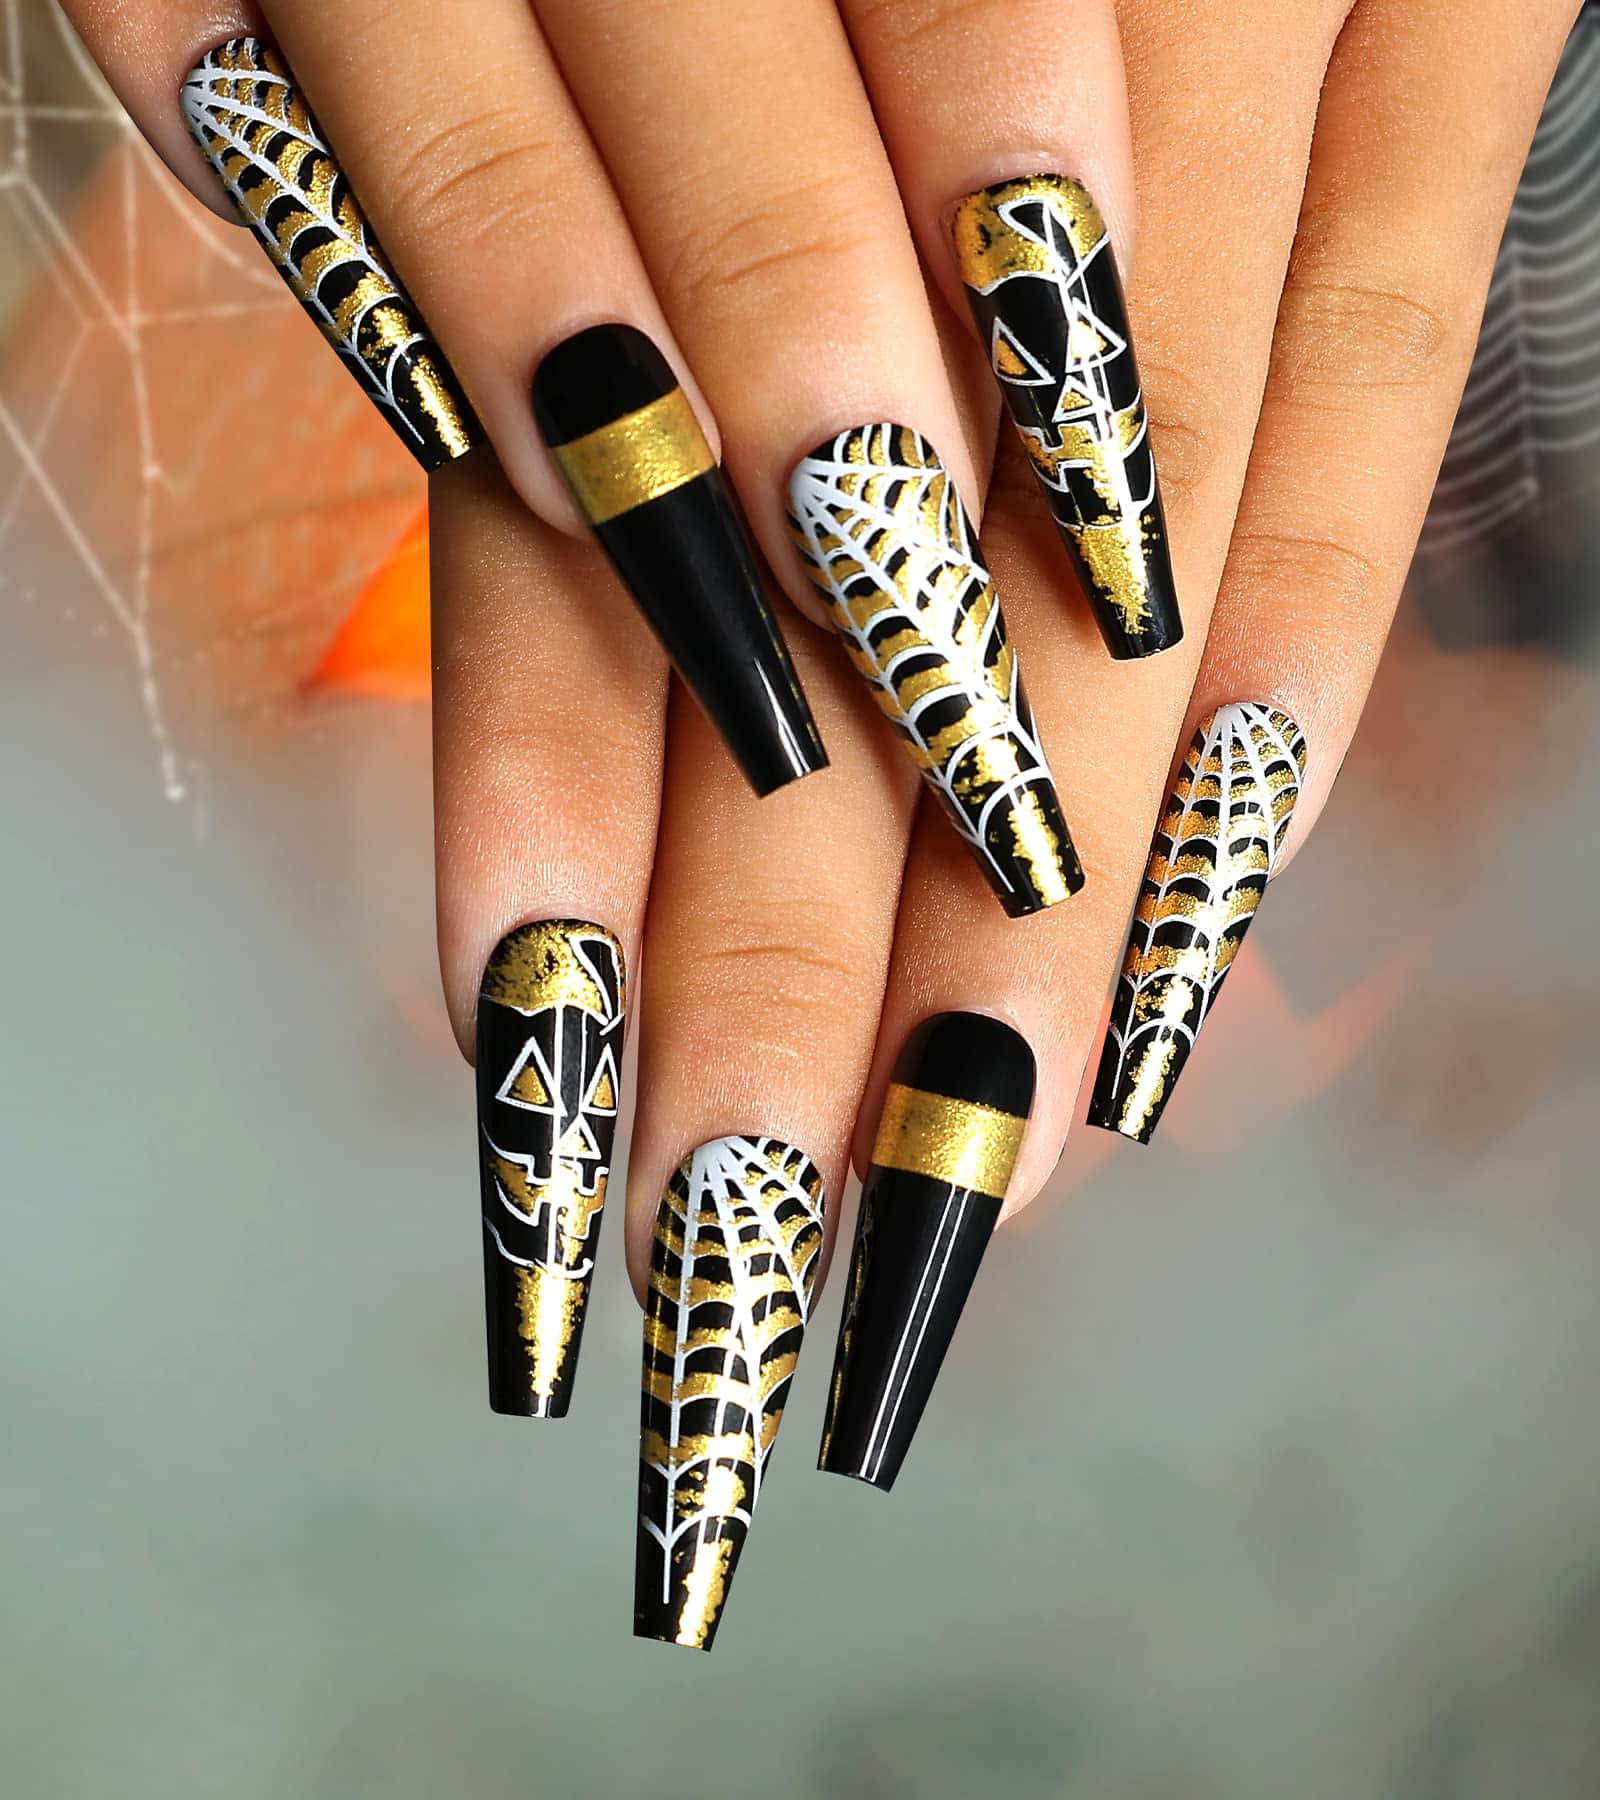 Get creative this Halloween with fun and spooky nail art! Wallpaper